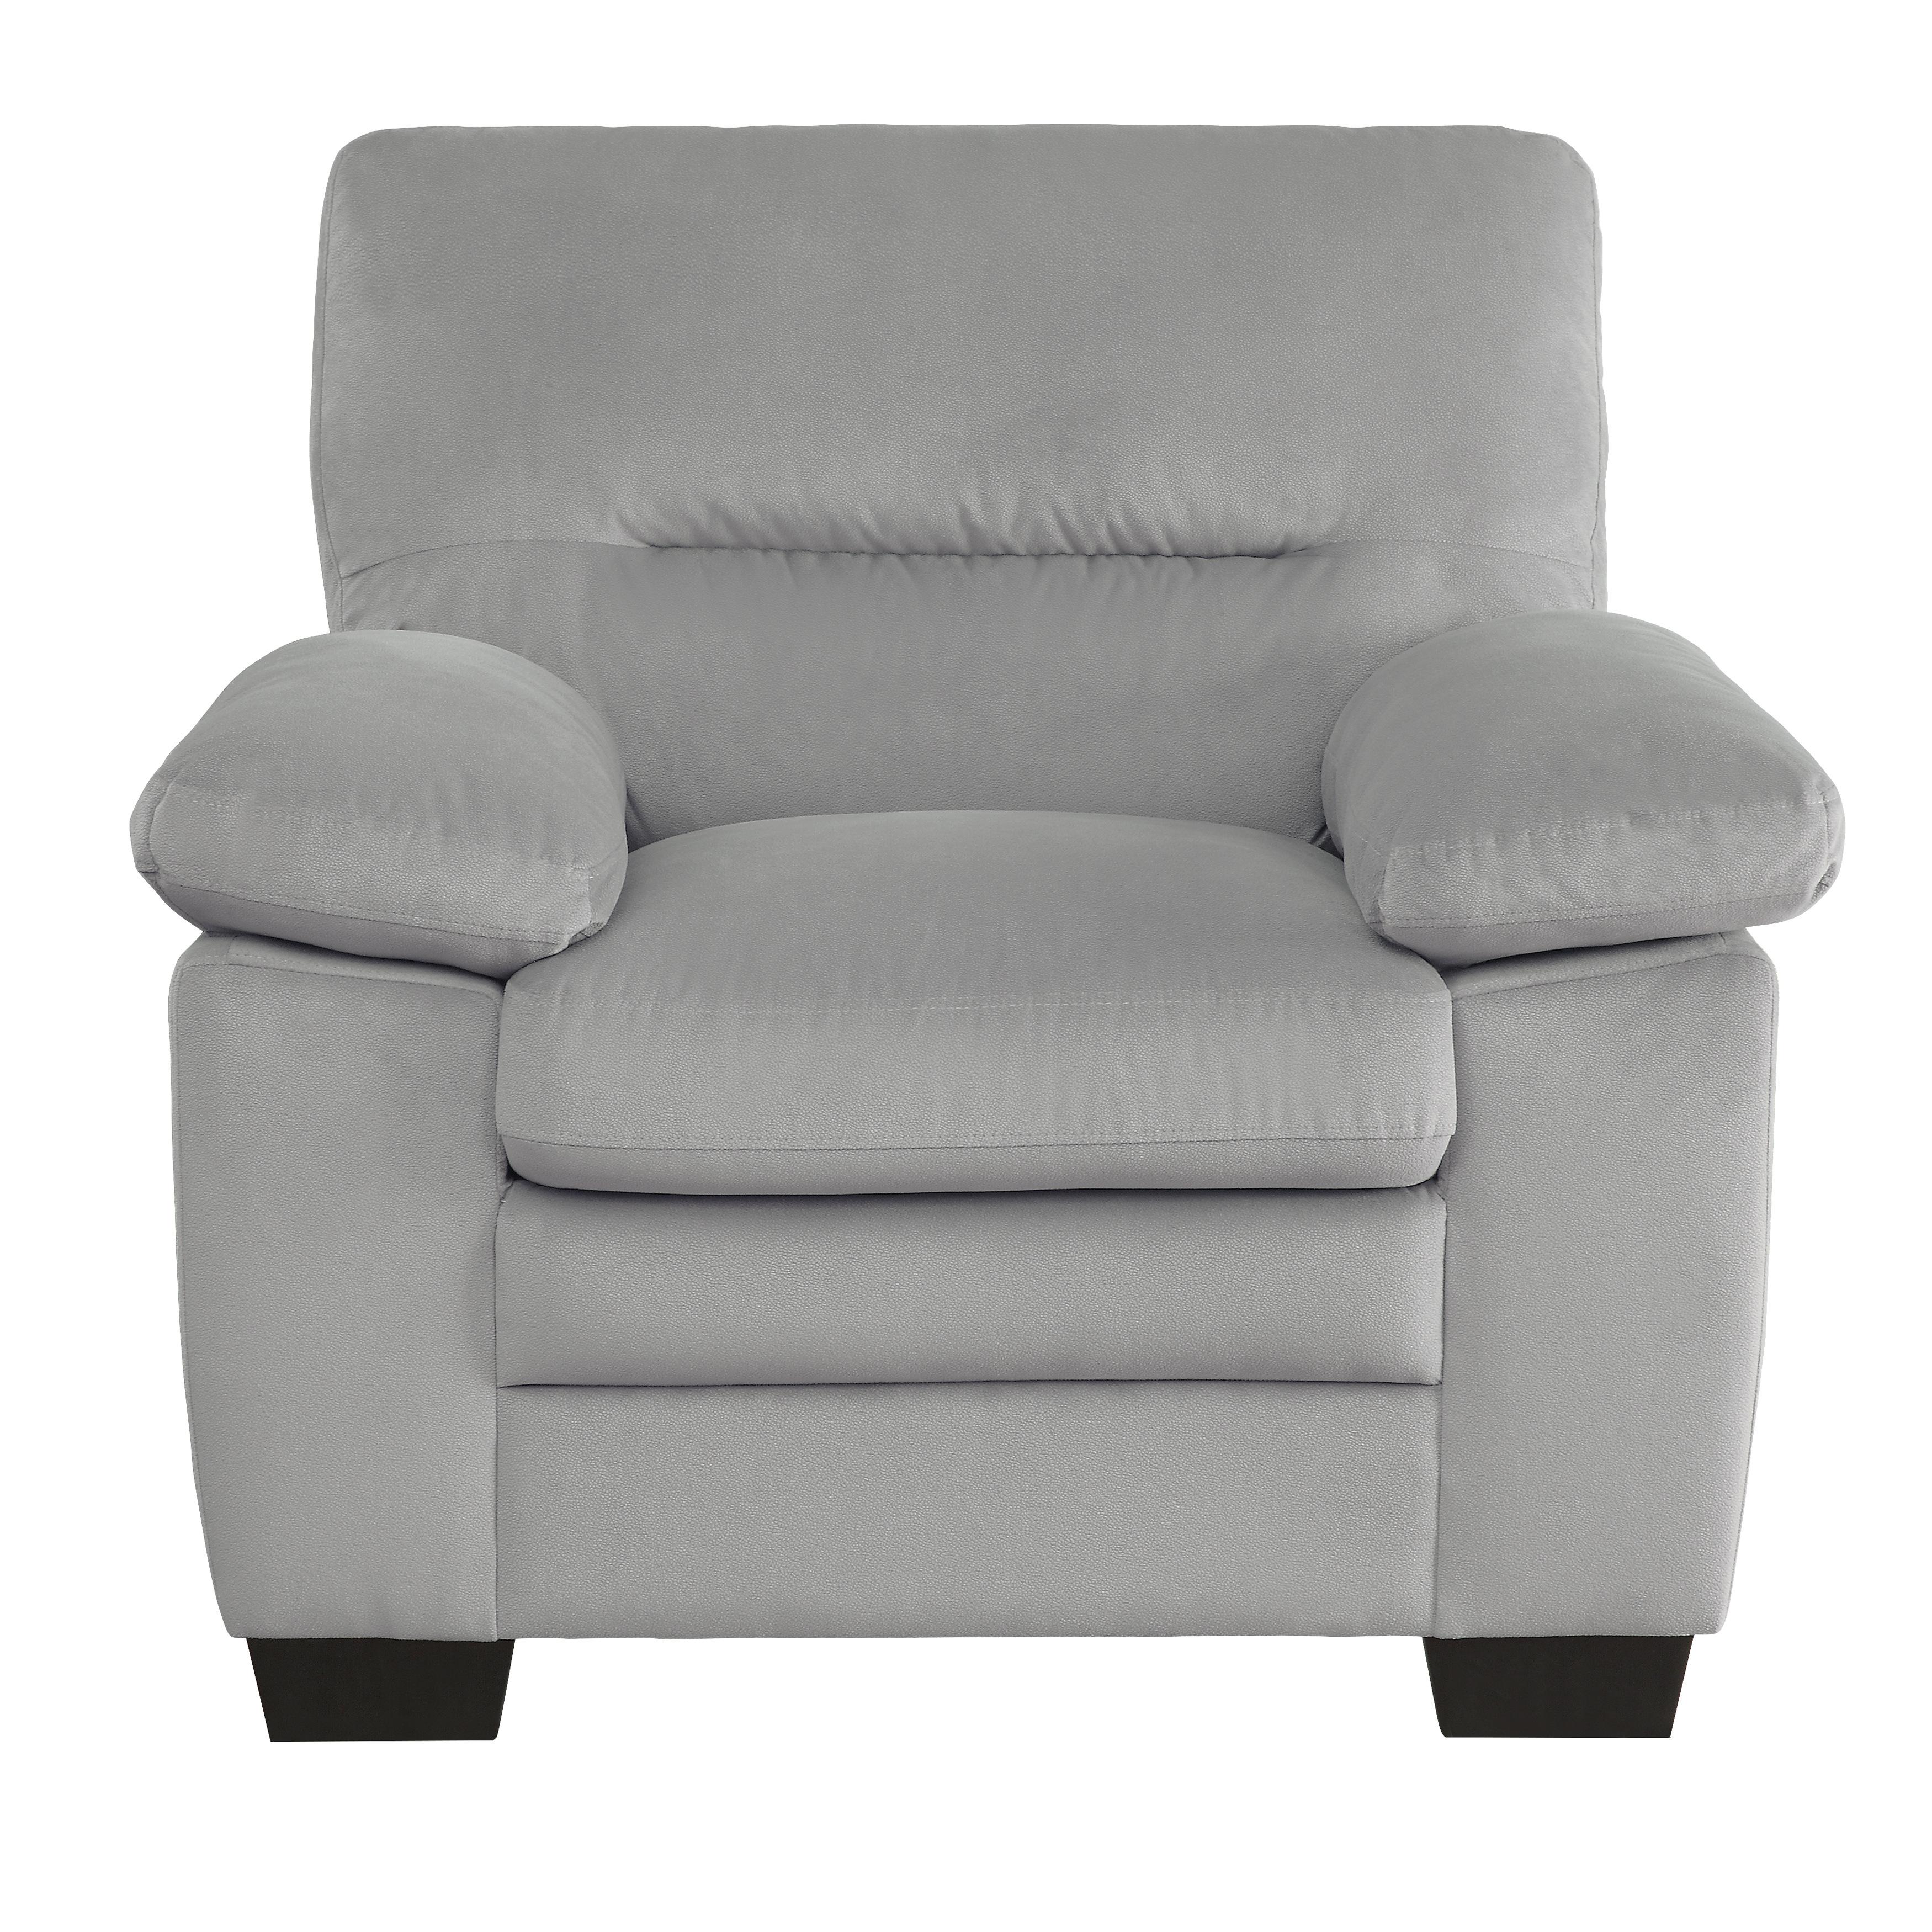 Modern Arm Chair 9328GY-1 Keighly 9328GY-1 in Gray 